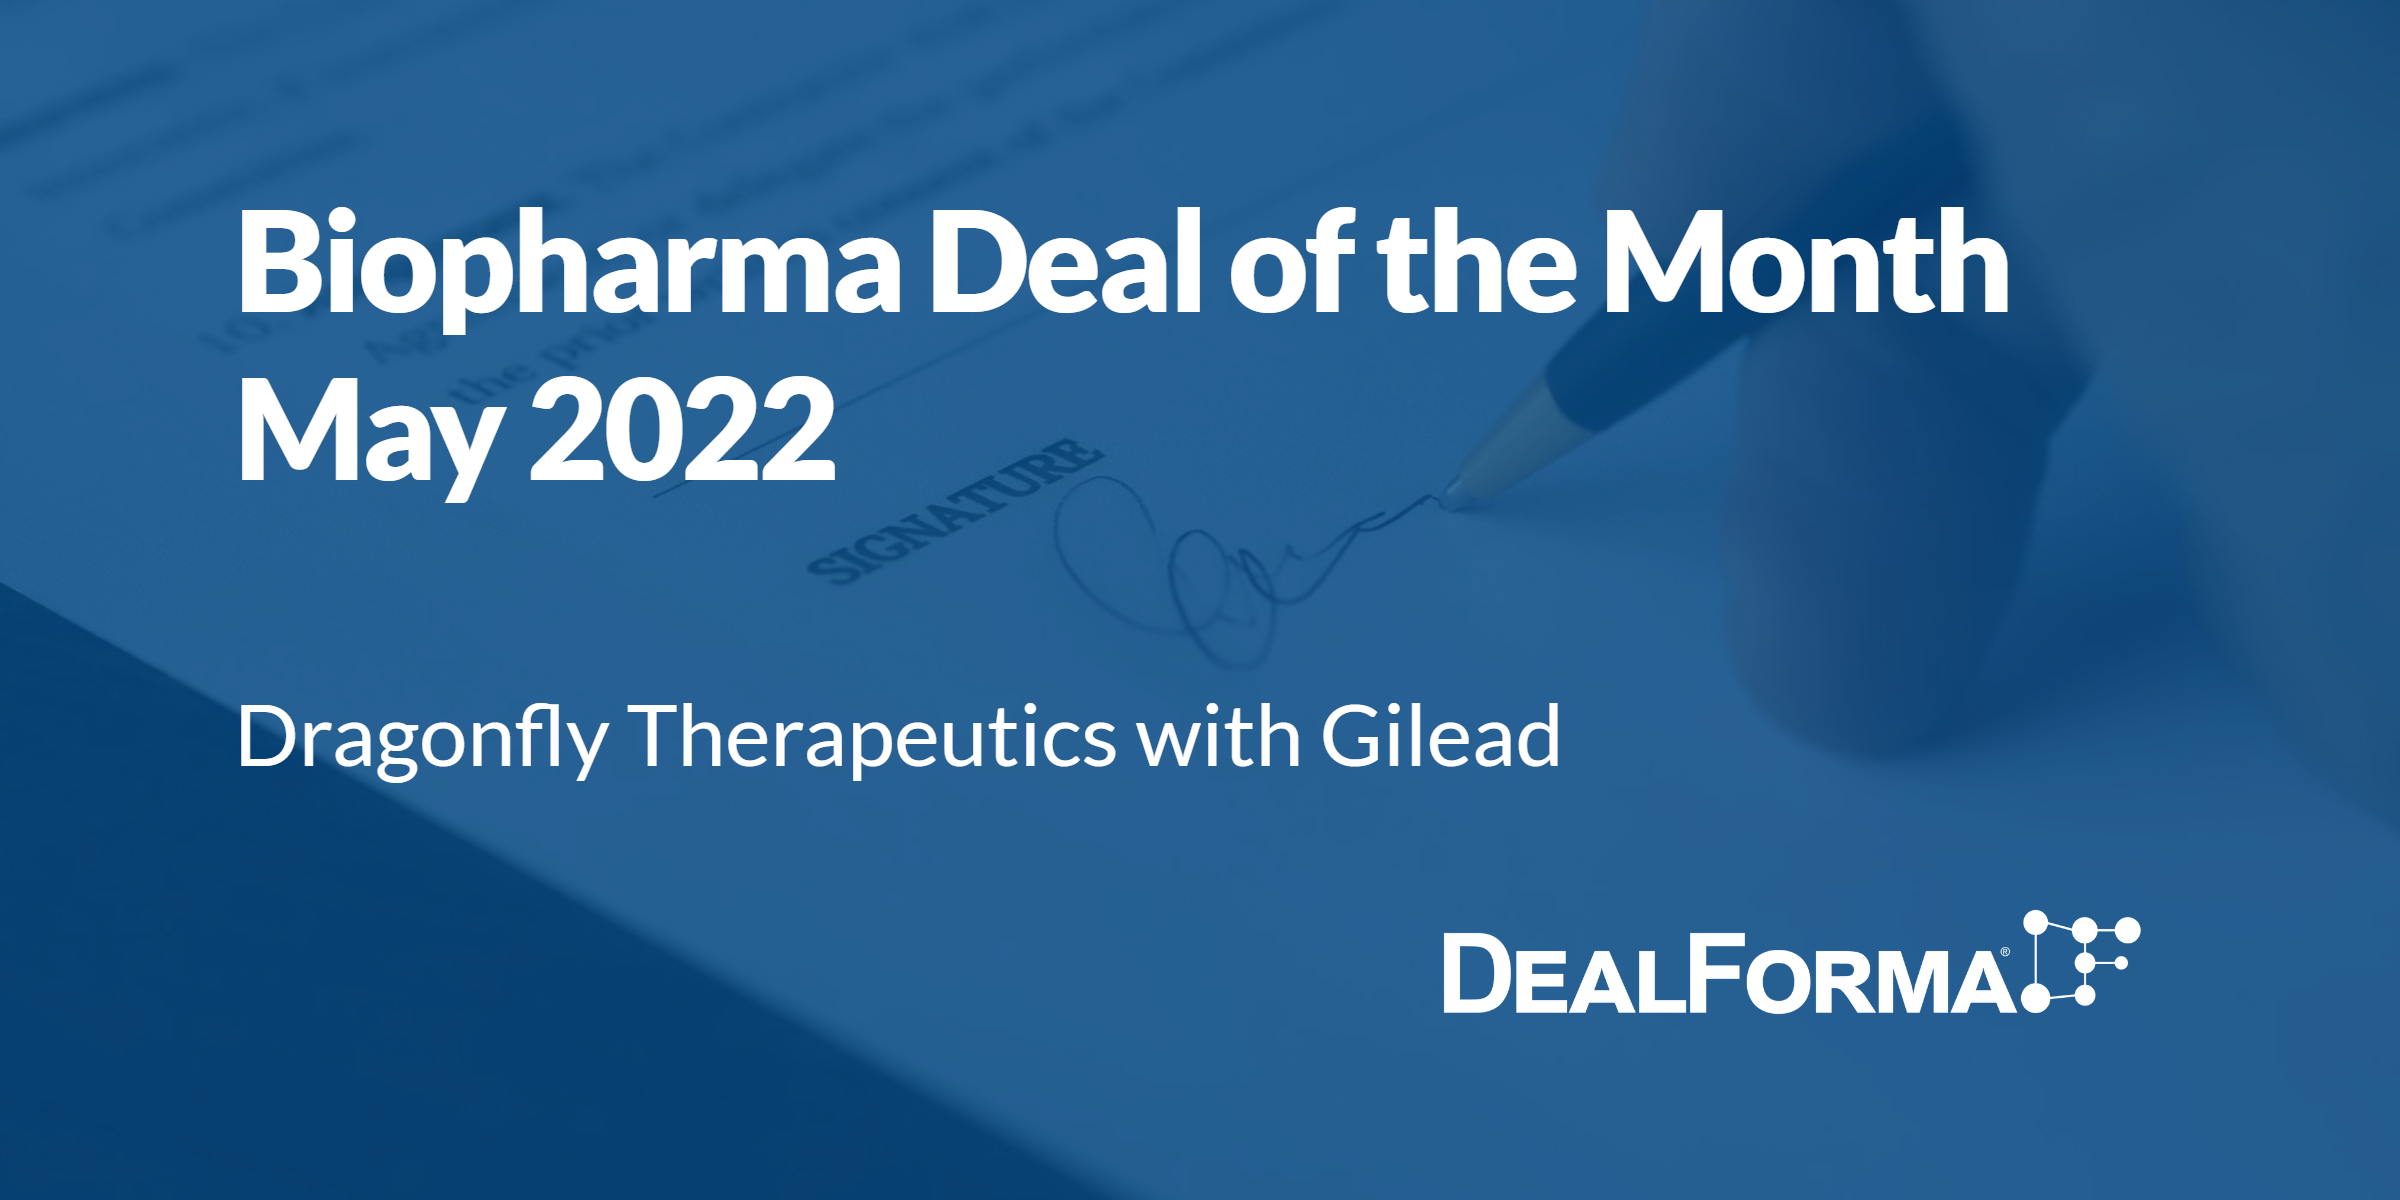 Top biopharma deal upfront May 2022